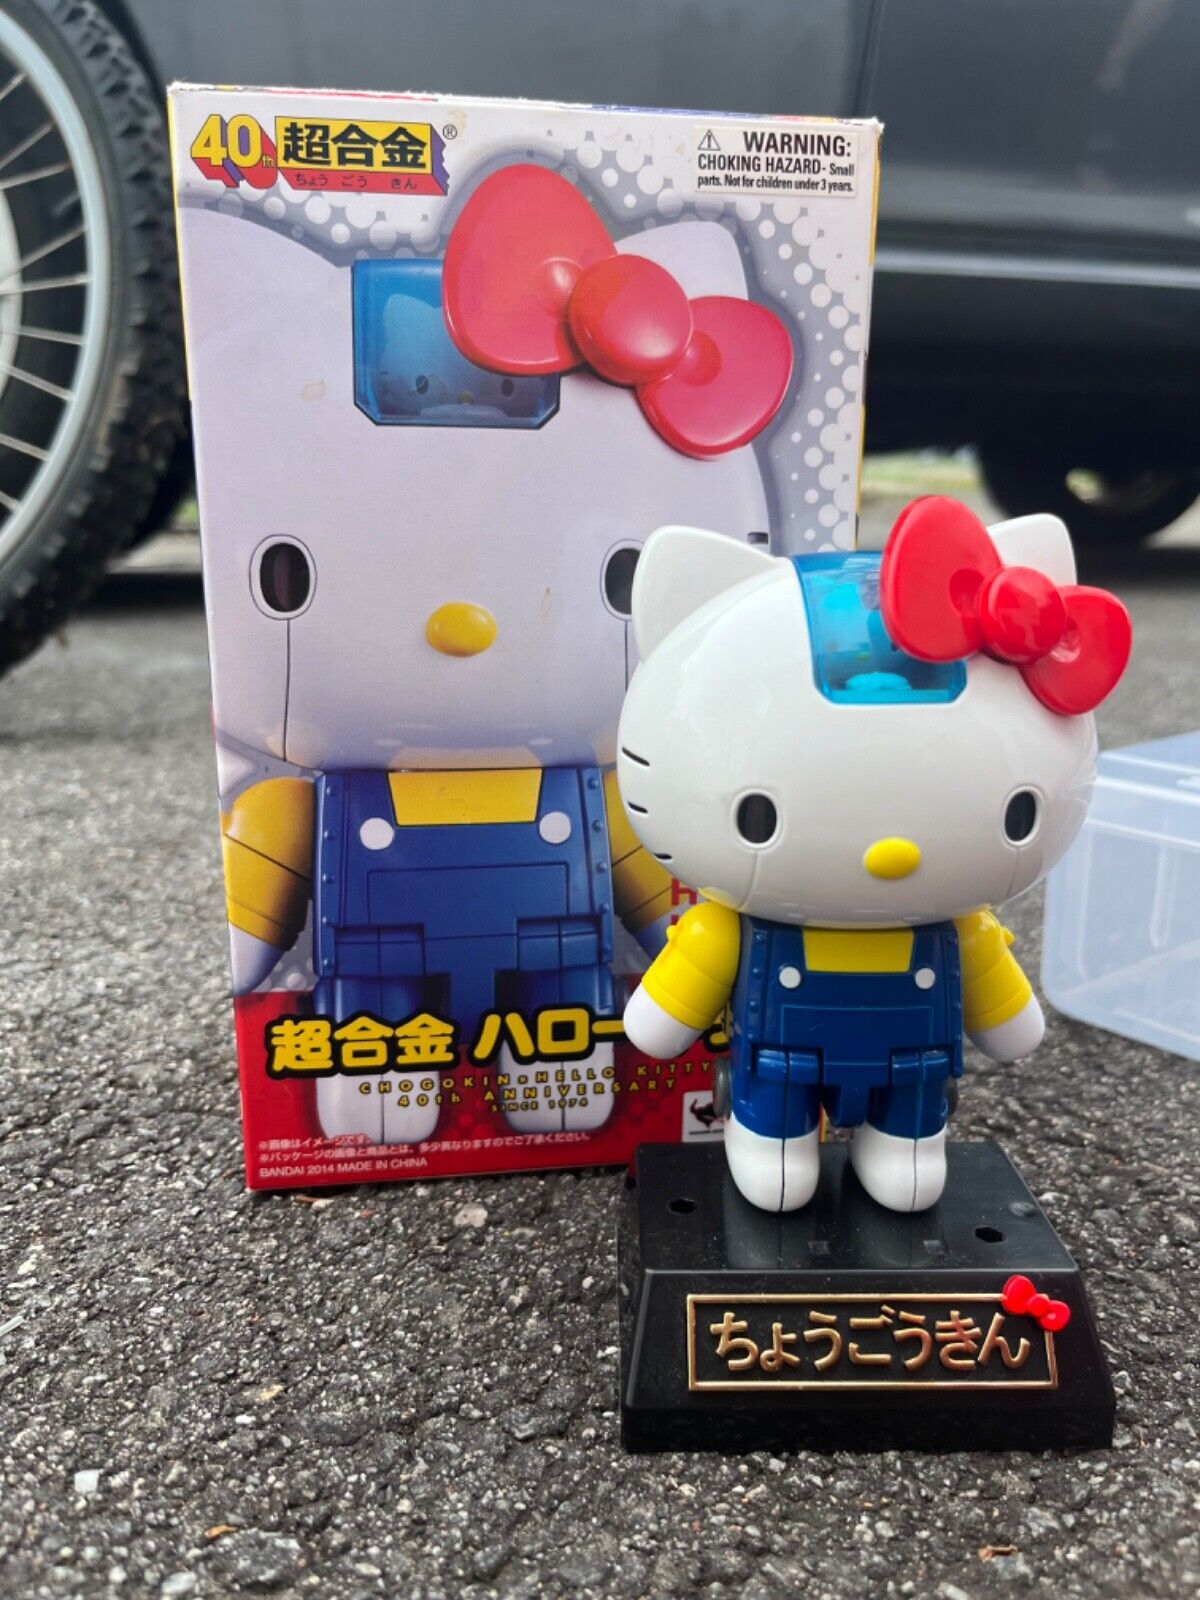 CHOGOKIN x Hello Kitty 40th Anniversary Limited Edition With Box 